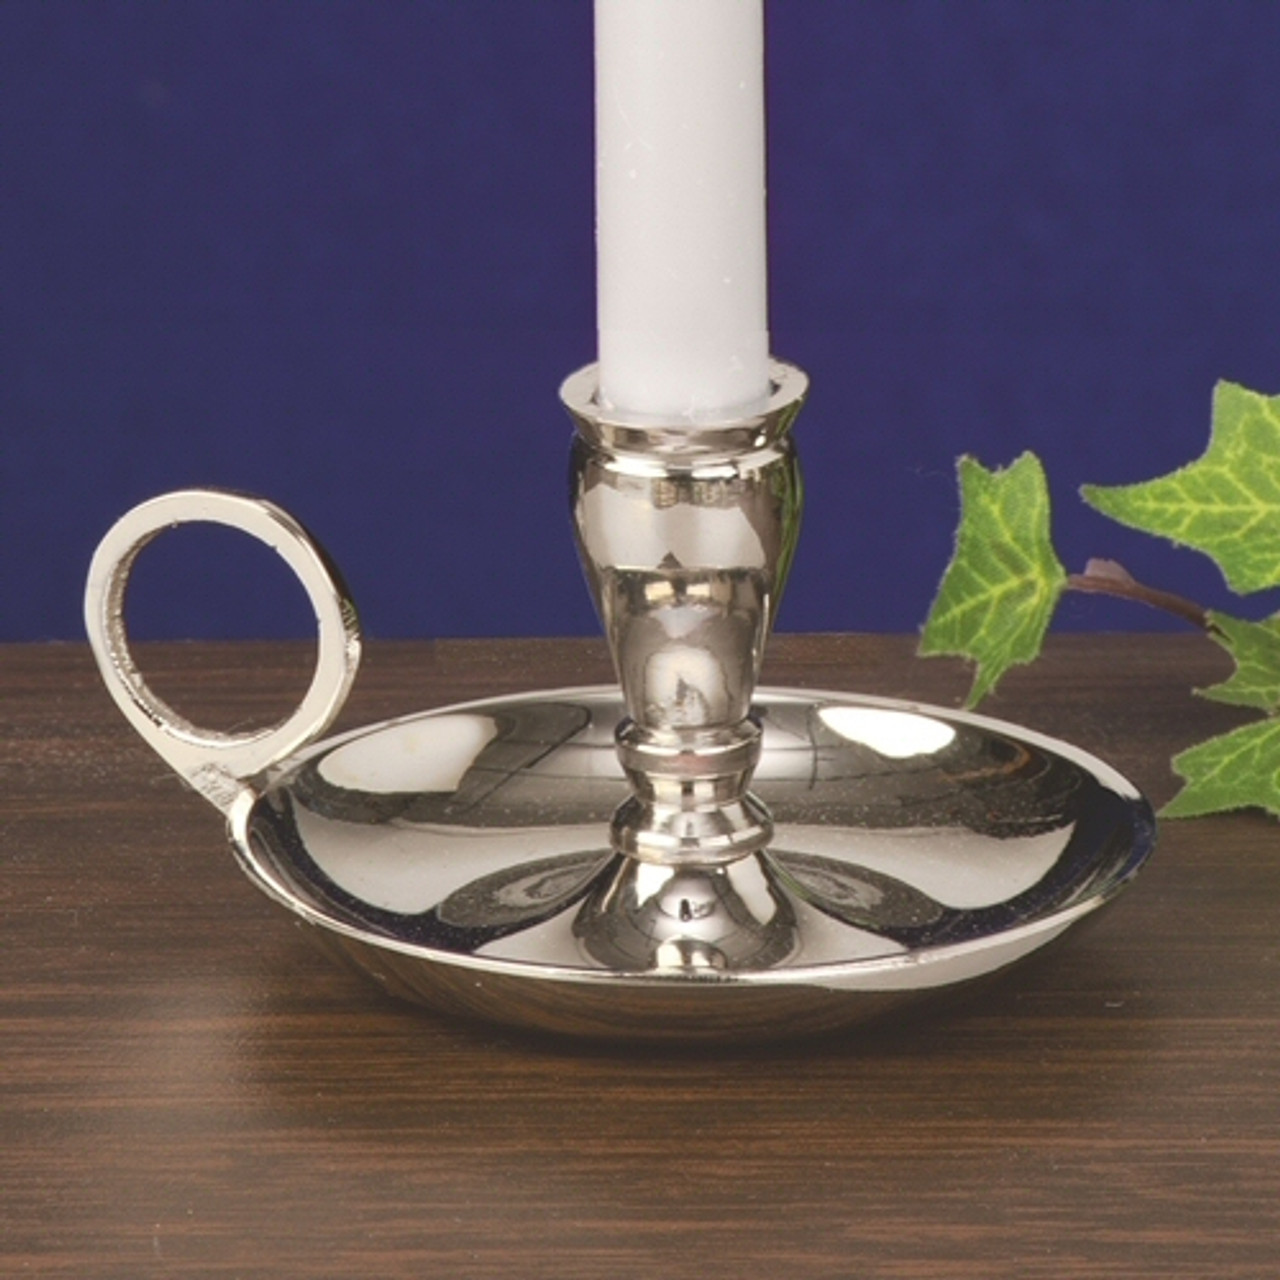 https://cdn11.bigcommerce.com/s-oo0gdojvjo/images/stencil/1280x1280/products/19839/29705/h81n-shiny-nickel-chamberstick-taper-candle-holders-set-of-6__97136.1537260420.jpg?c=2